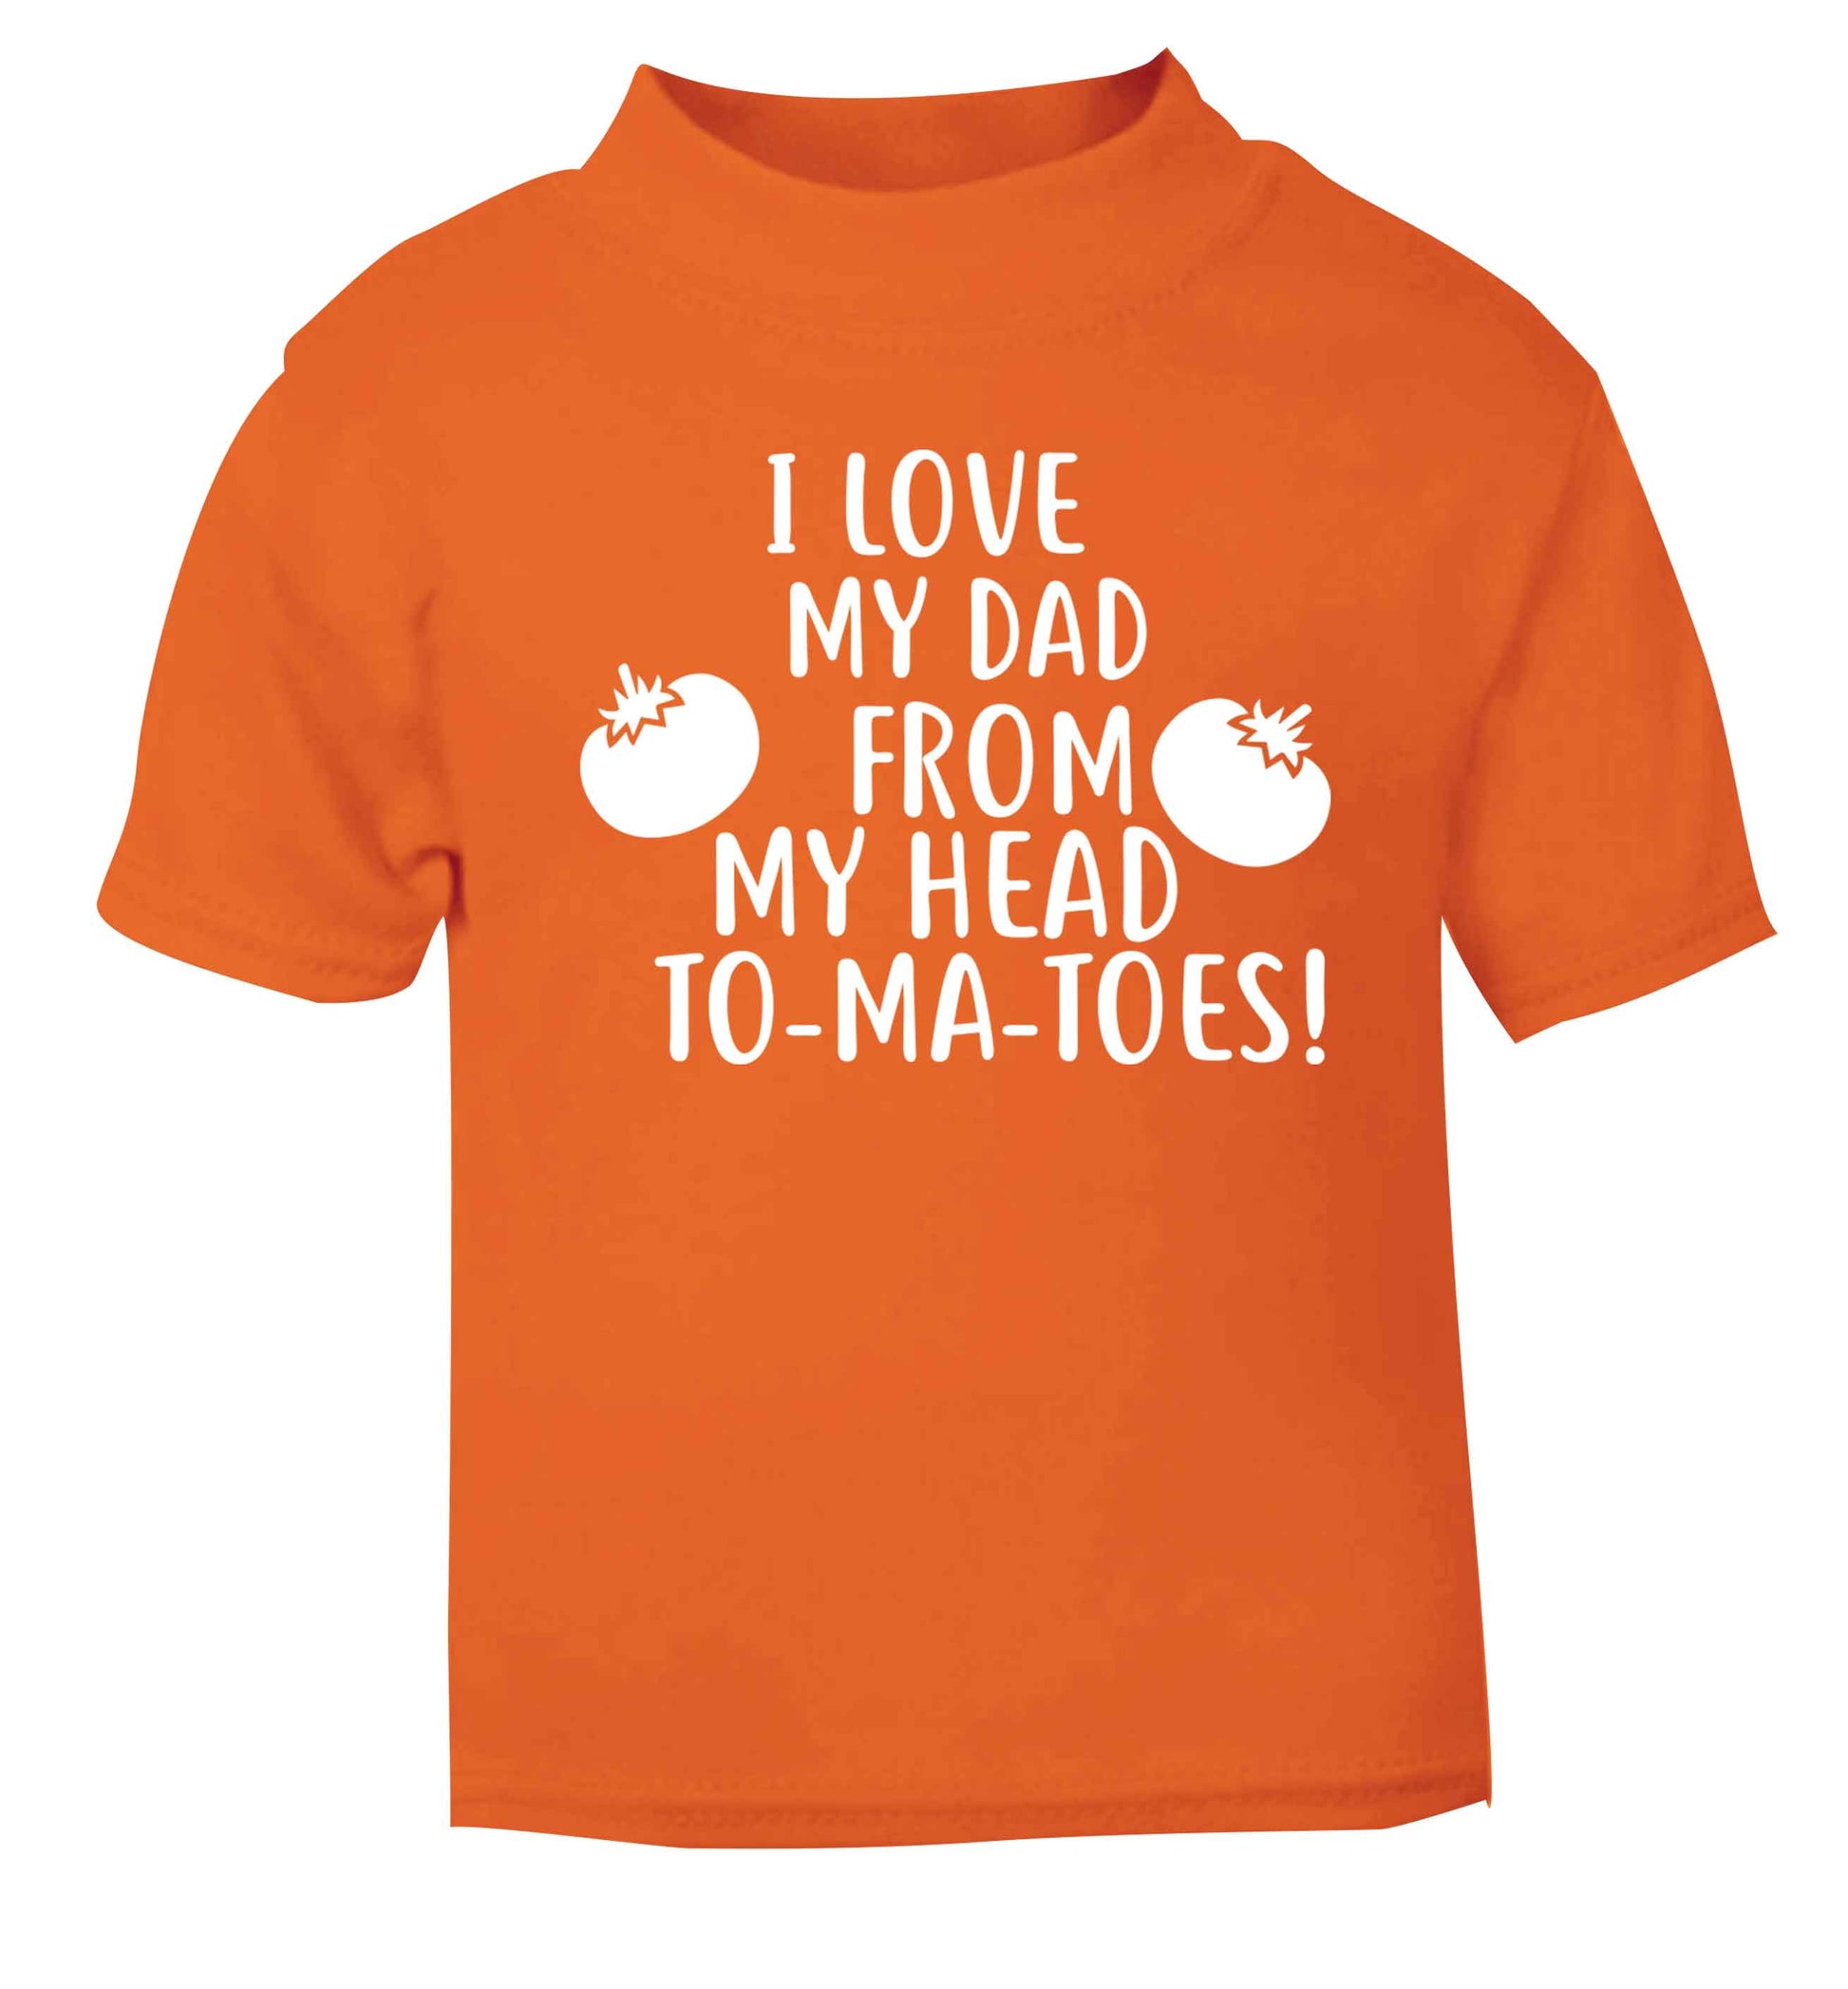 I love my dad from my head to-ma-toes orange baby toddler Tshirt 2 Years